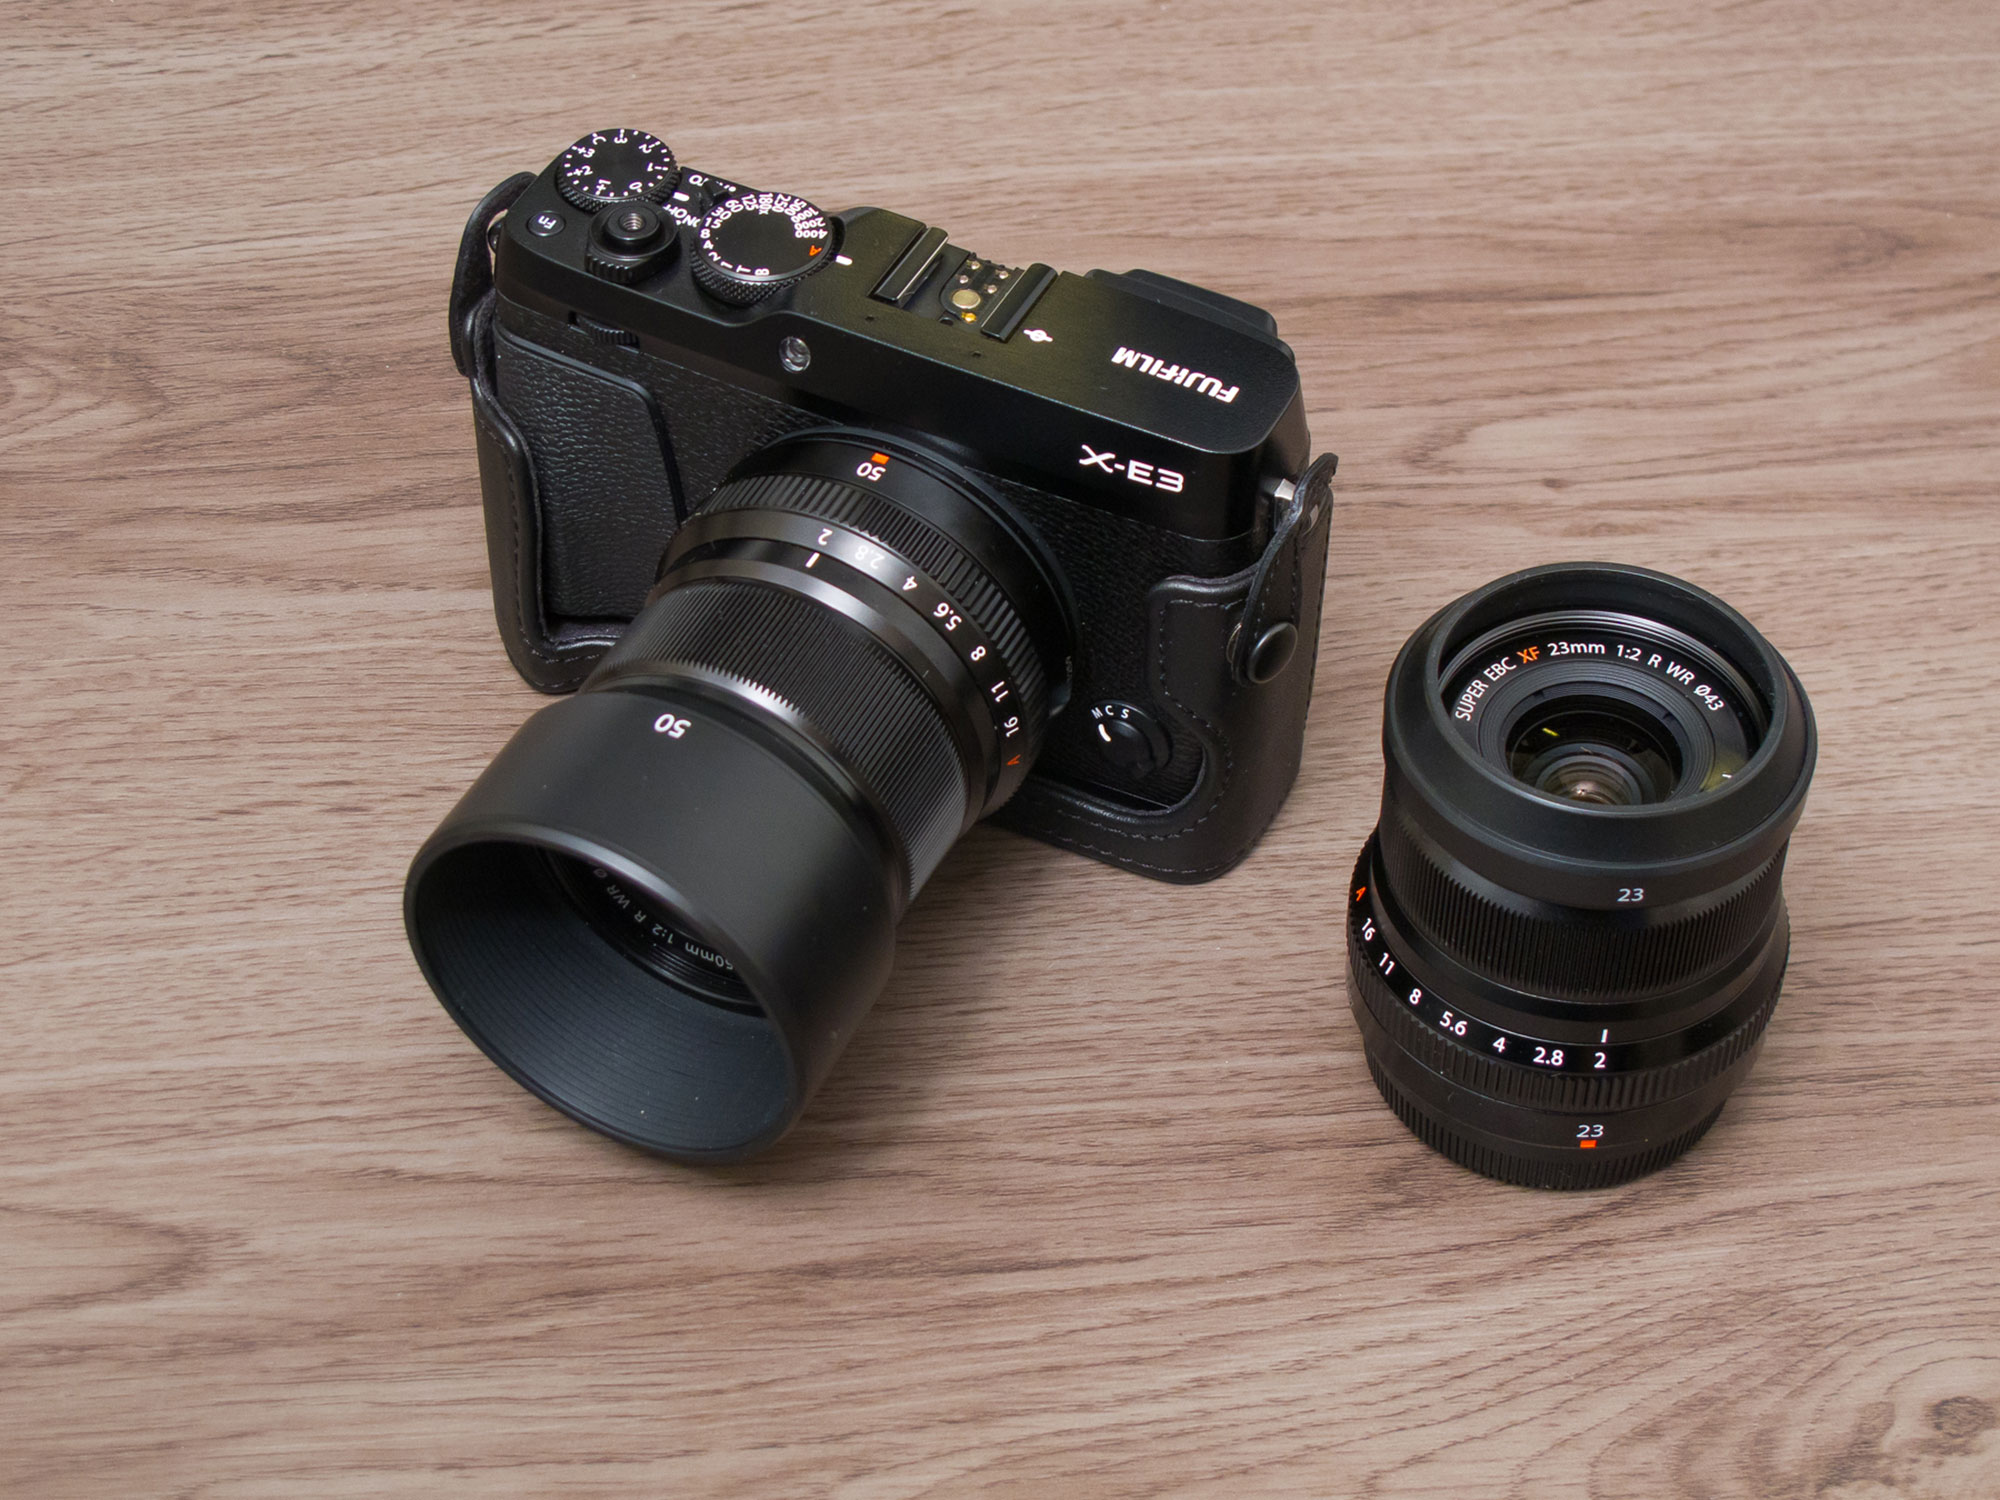 Buyer’s guide to Fuji X-Trans Cameras